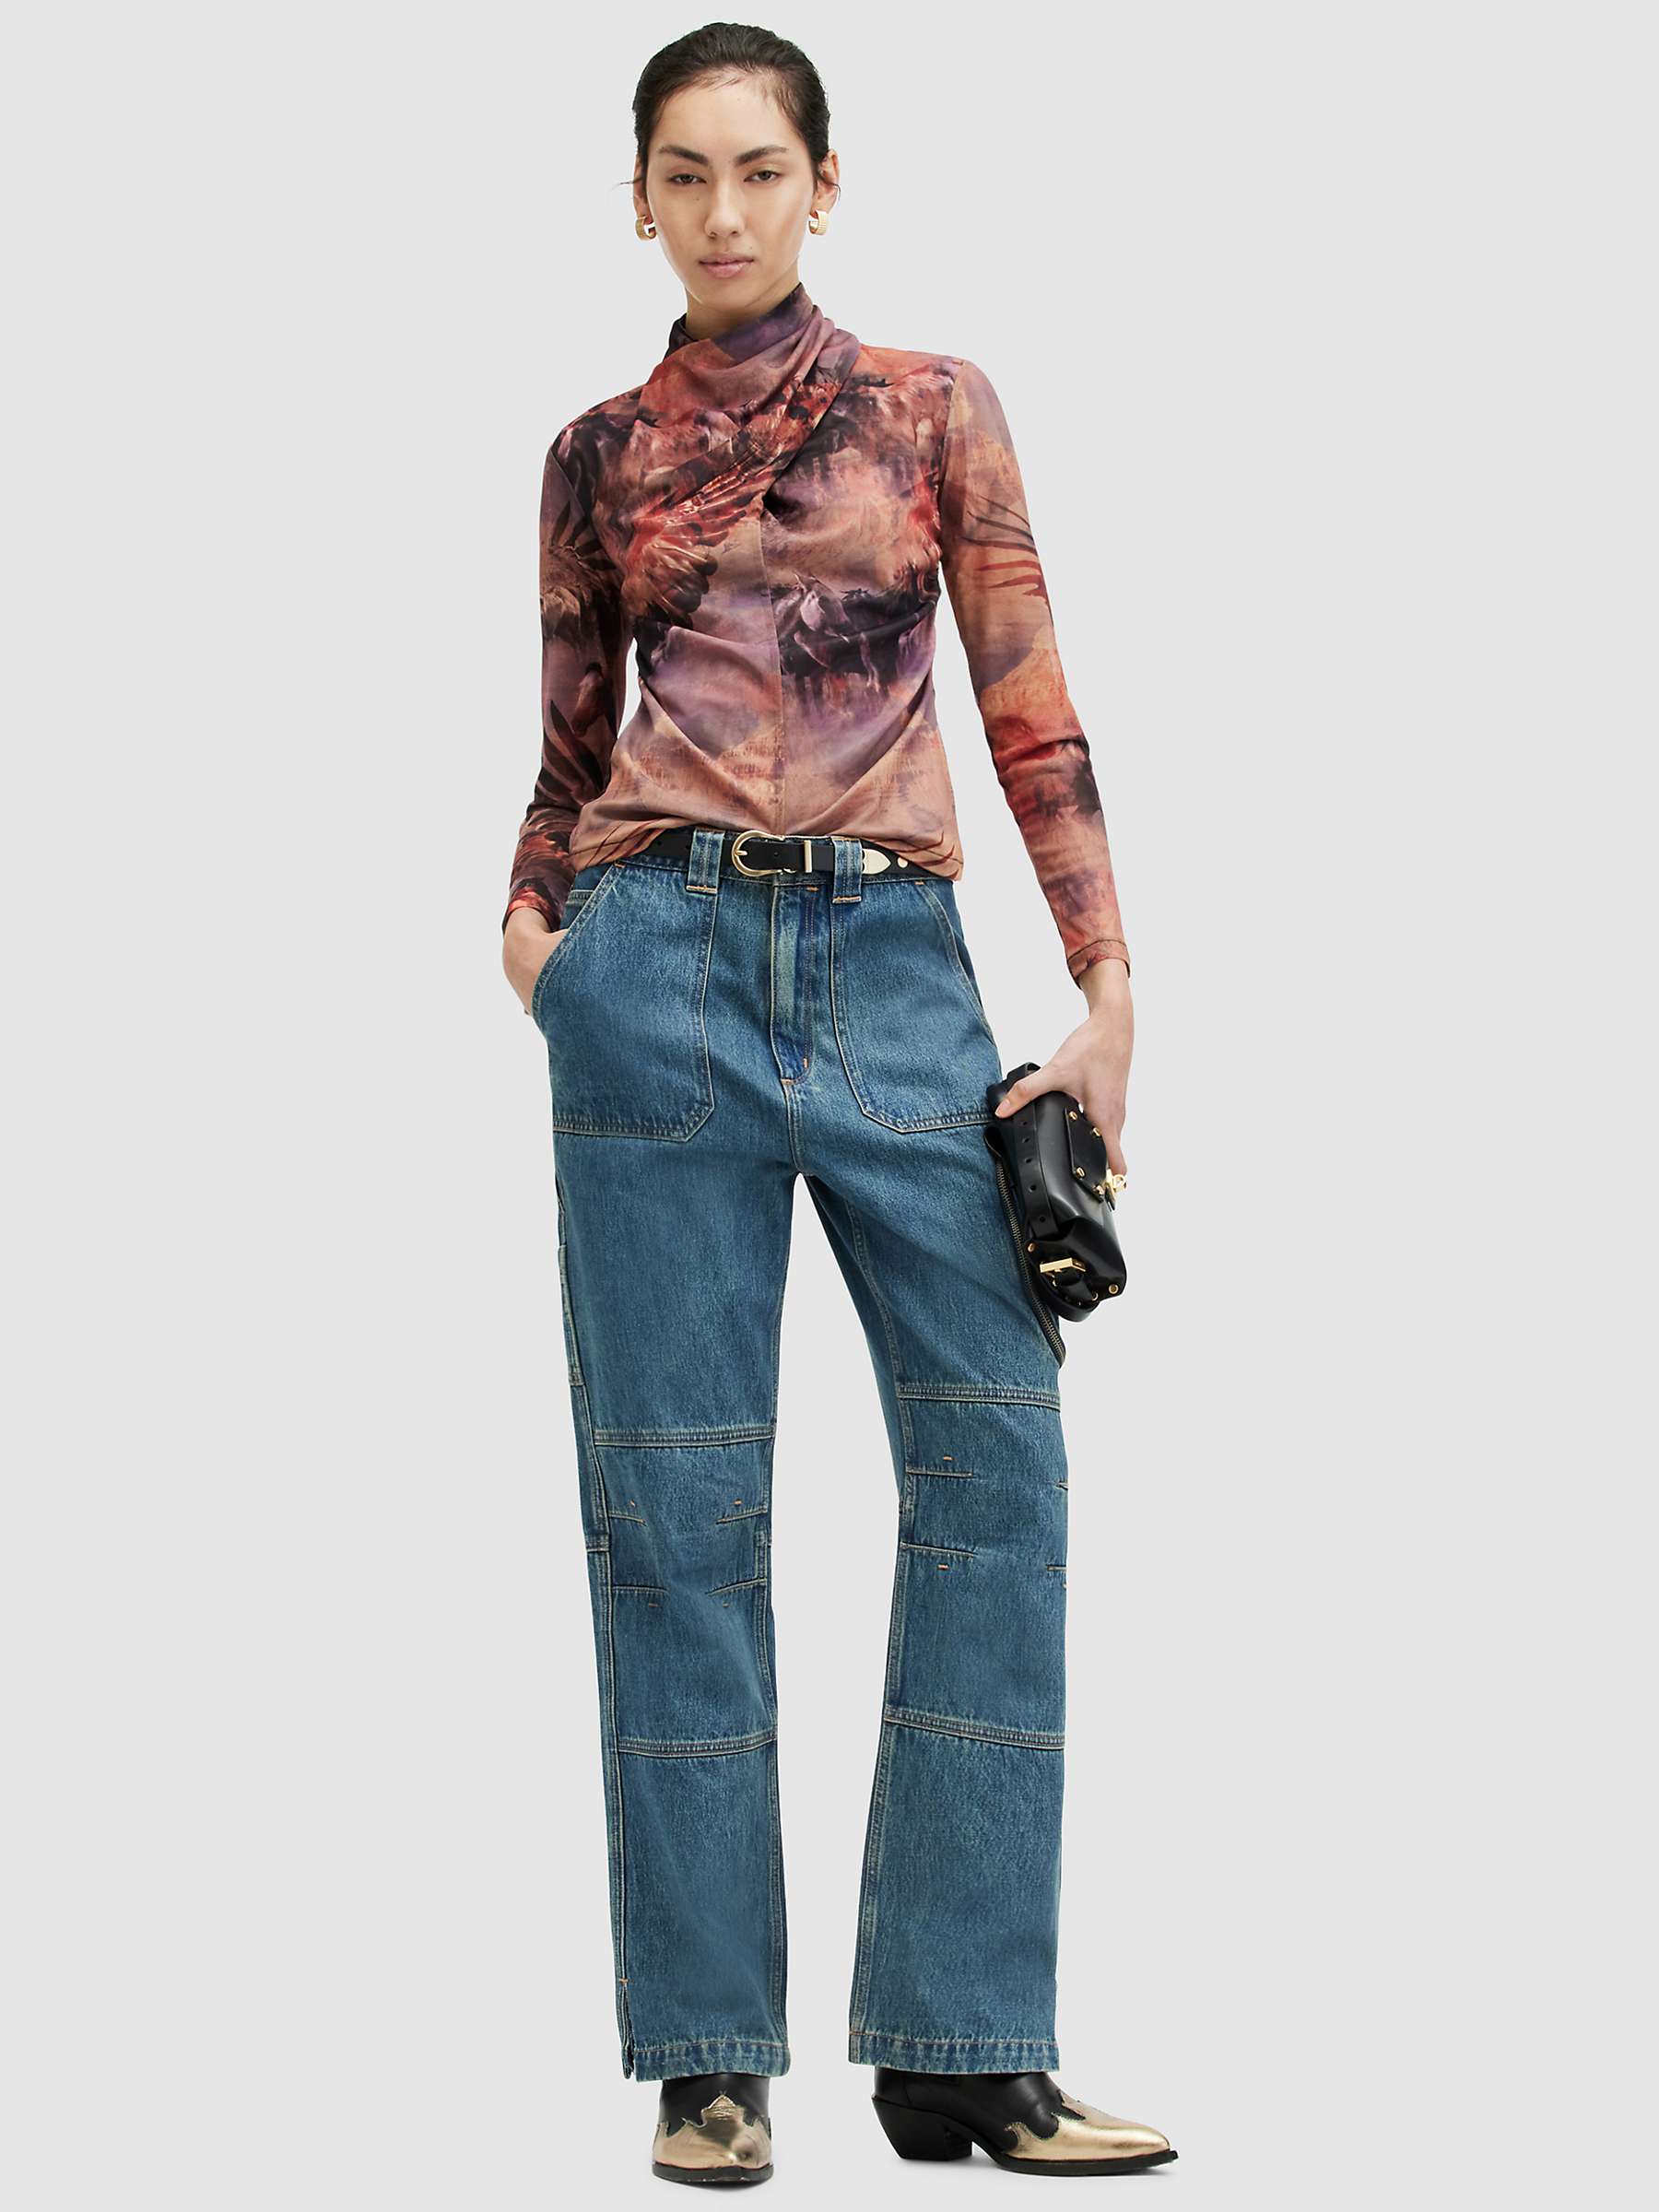 Buy AllSaints Tia Colca Animal and Flower Print Blouse, Canyon Purple/Multi Online at johnlewis.com